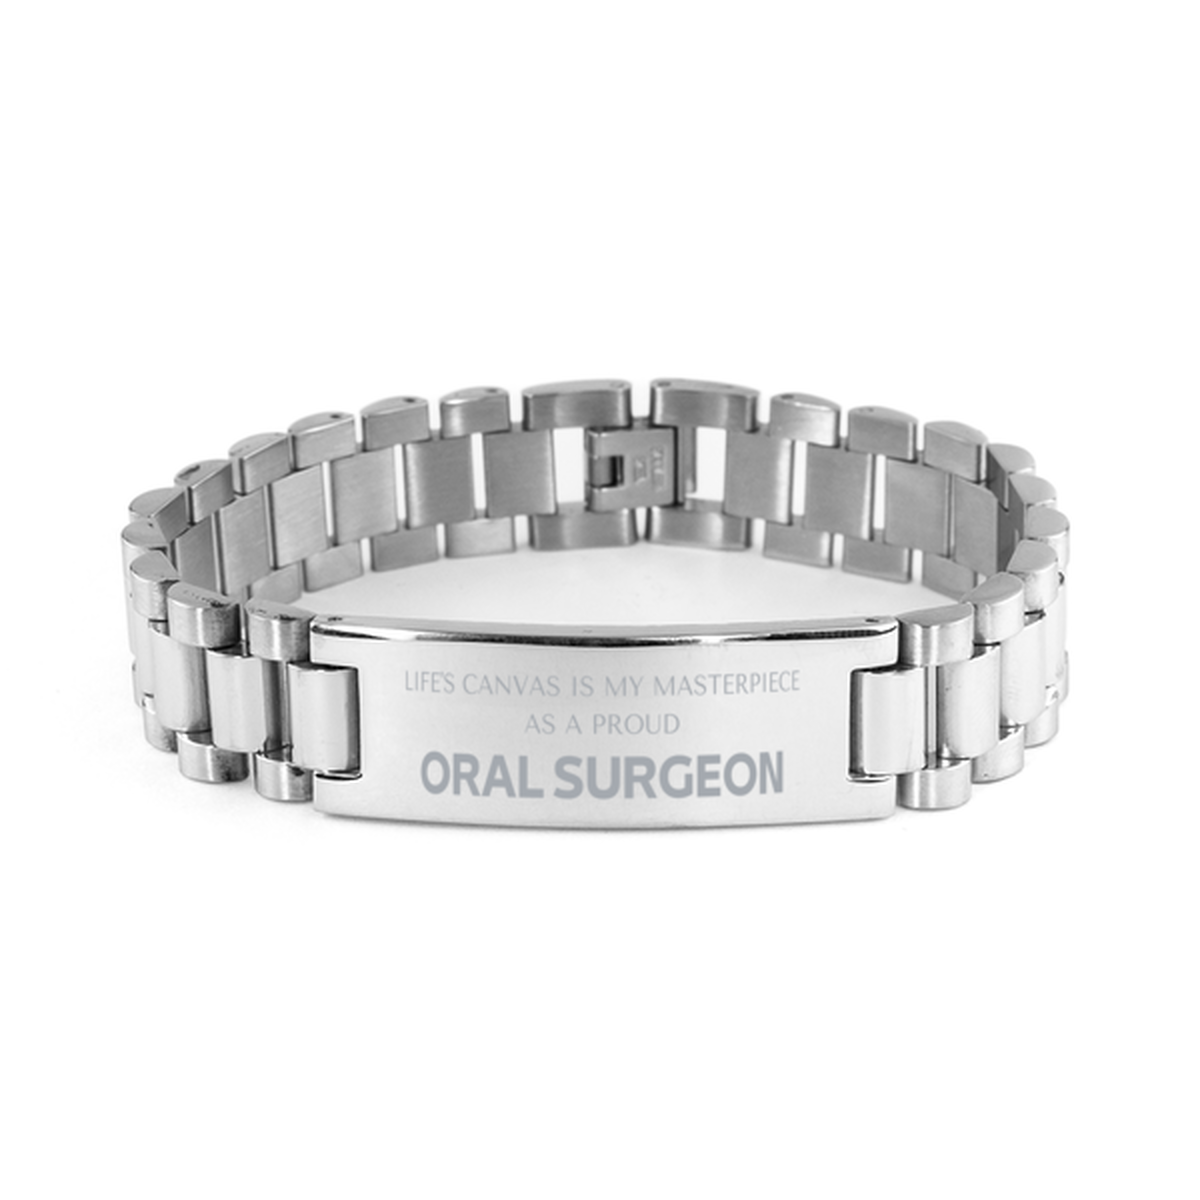 Proud Oral Surgeon Gifts, Life's canvas is my masterpiece, Epic Birthday Christmas Unique Ladder Stainless Steel Bracelet For Oral Surgeon, Coworkers, Men, Women, Friends